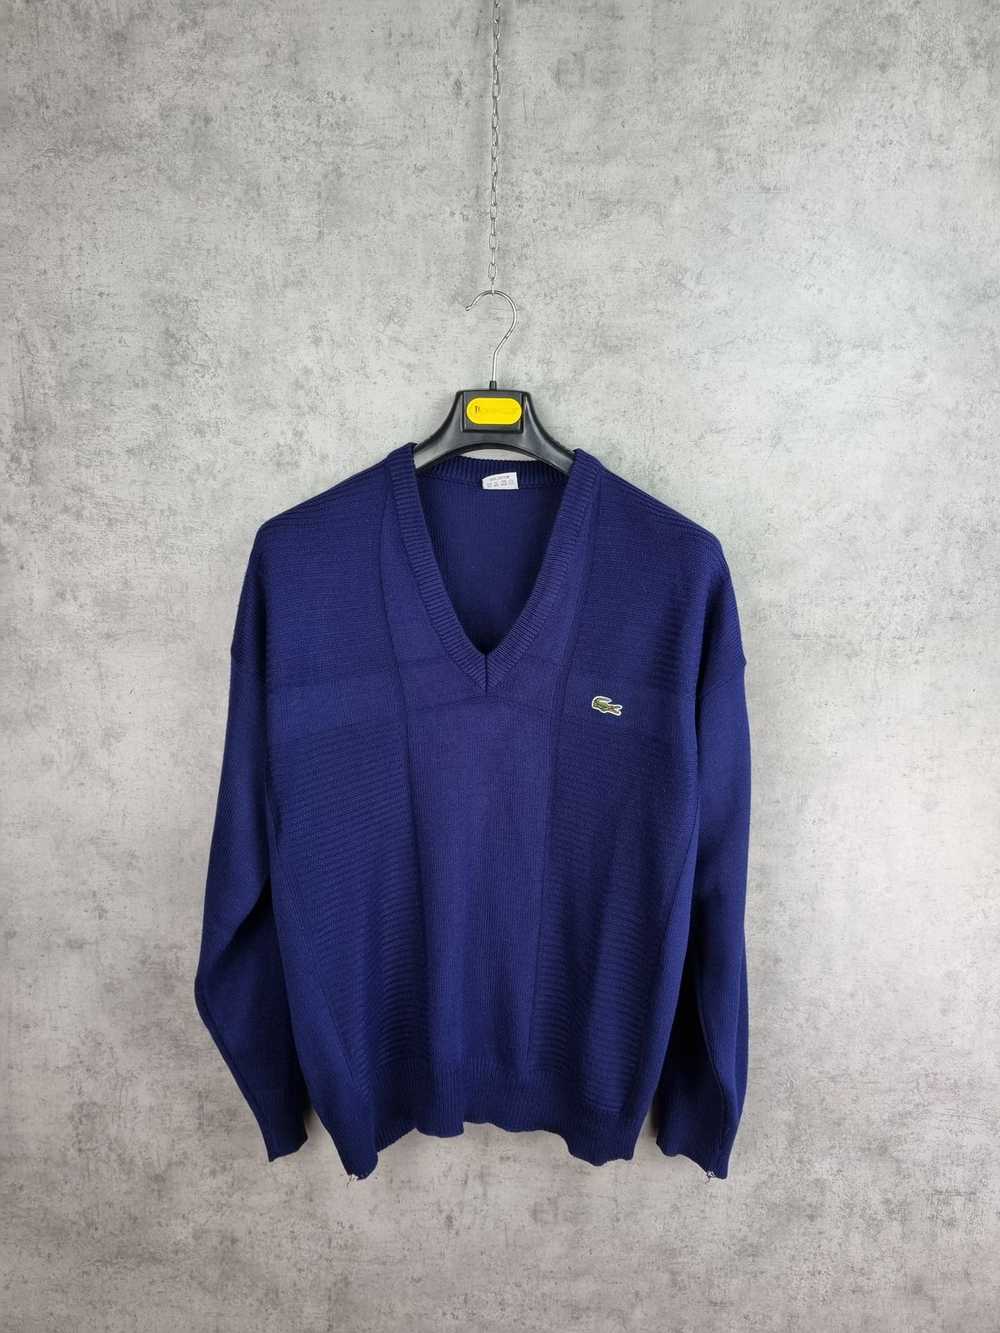 Coloured Cable Knit Sweater × Golf Wang × Lacoste… - image 4